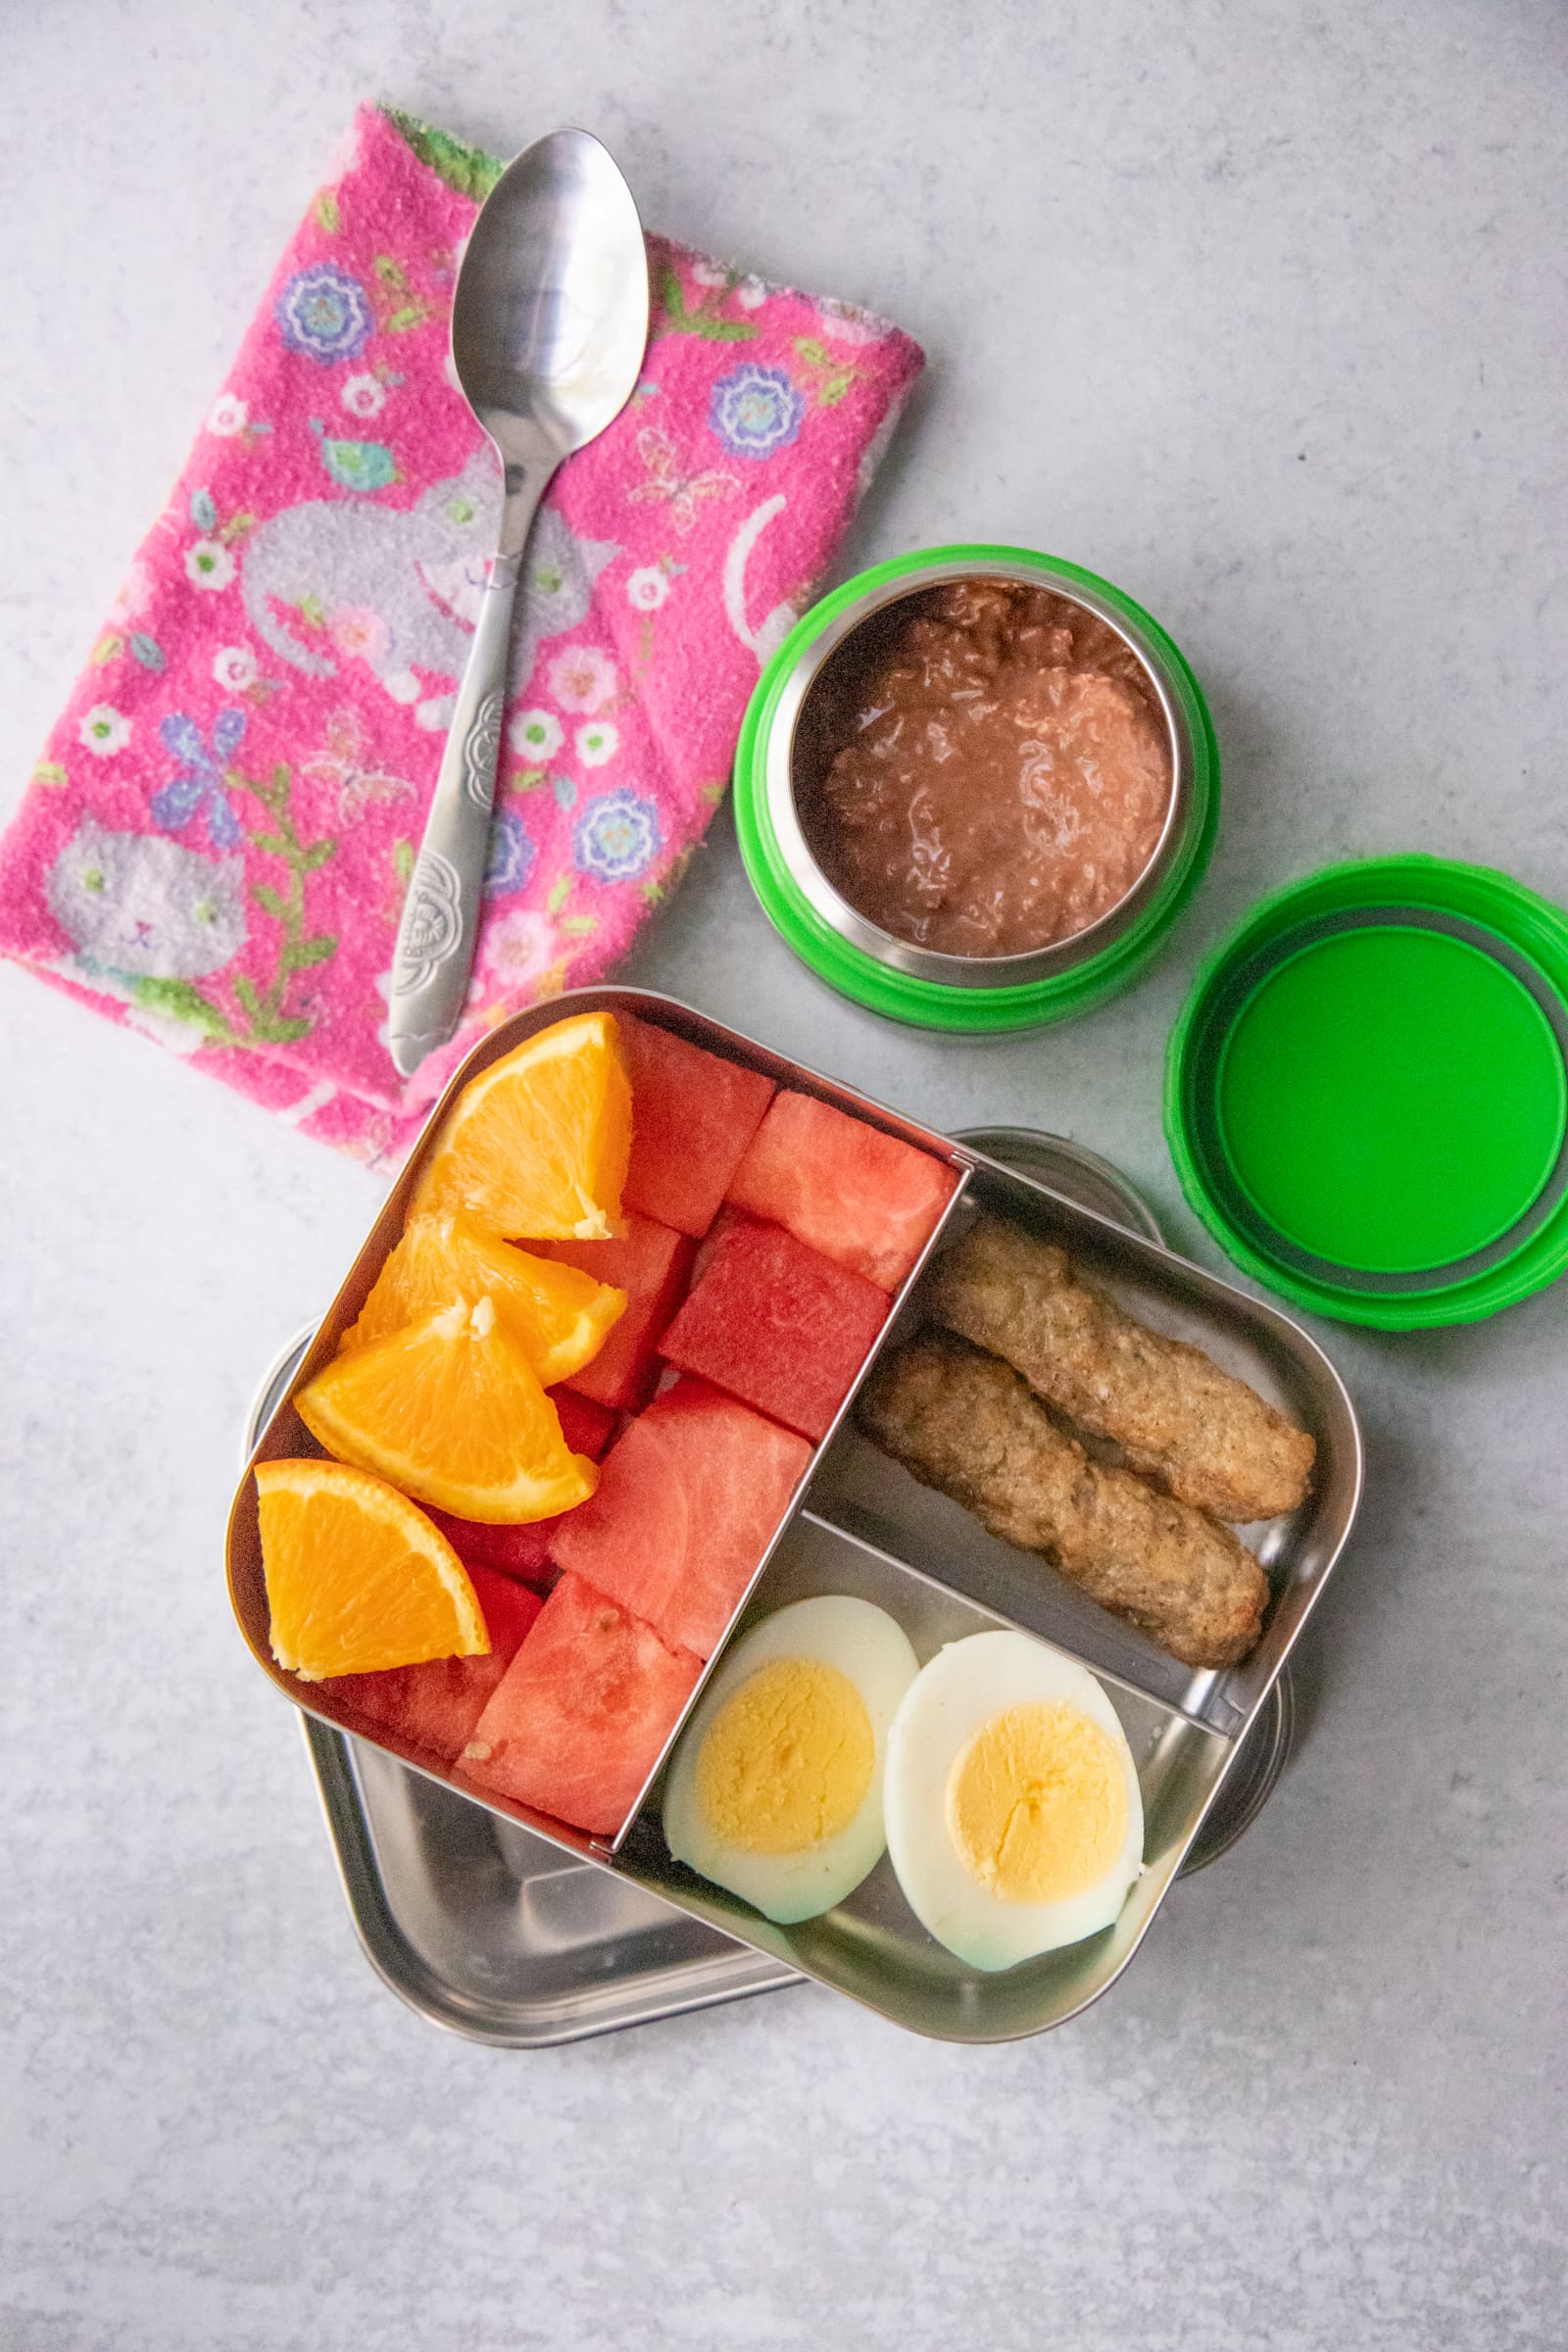 Waste-free packed lunch of sausage links, hard boiled egg, applesauce, and fruit.